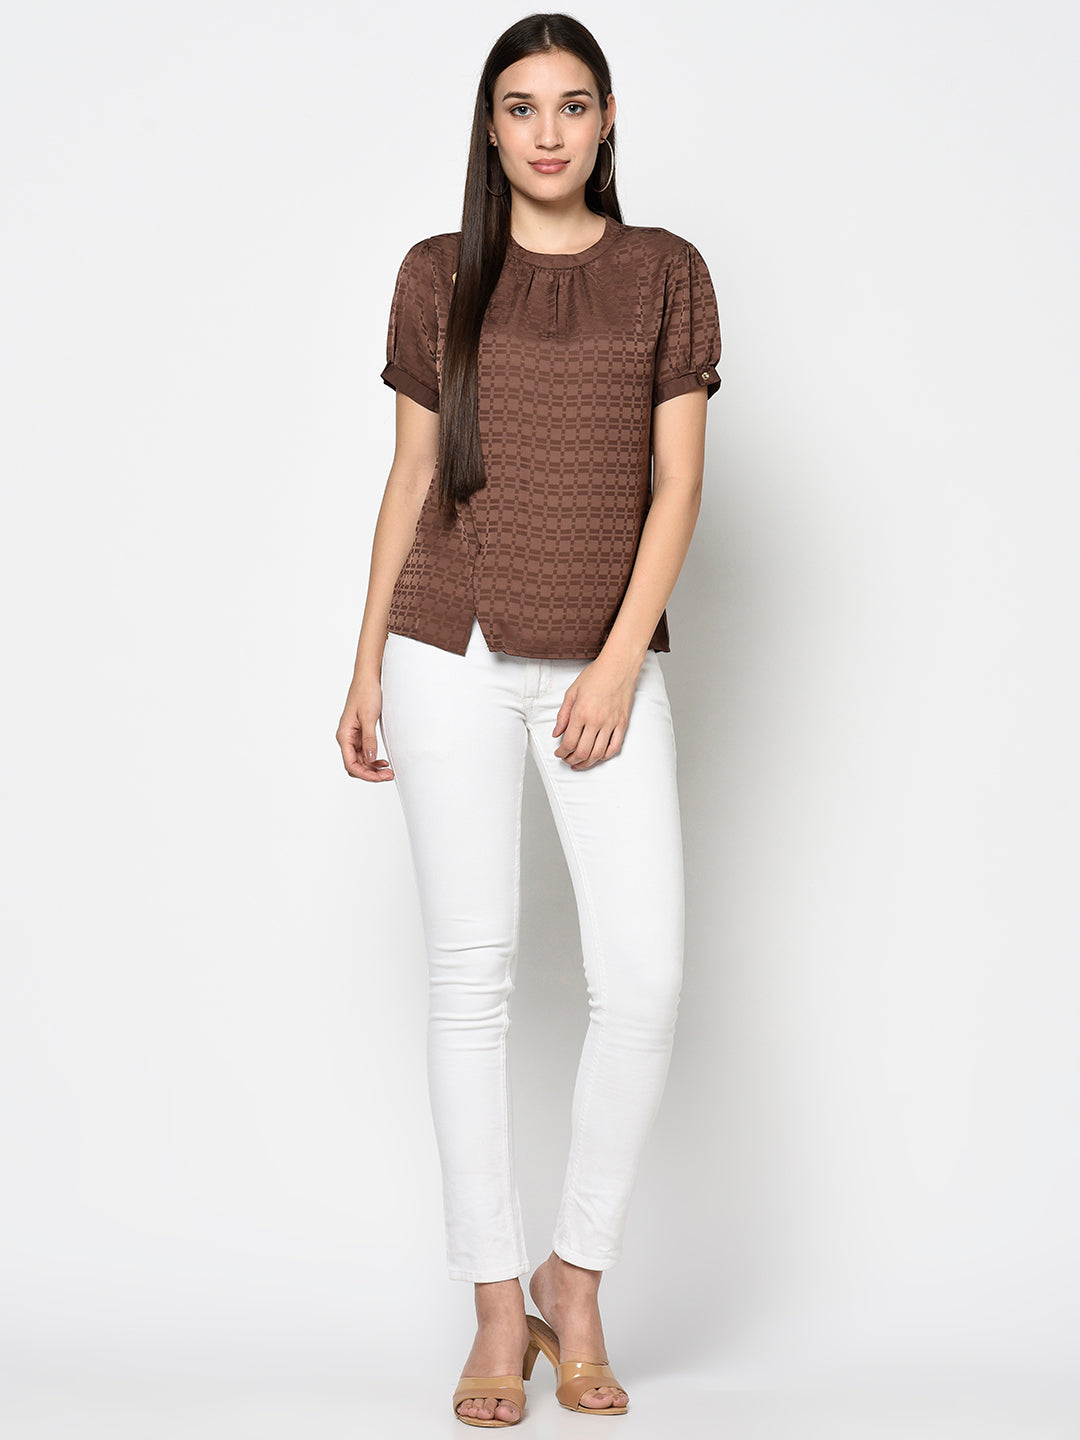 Brown Round Neck Woven Top